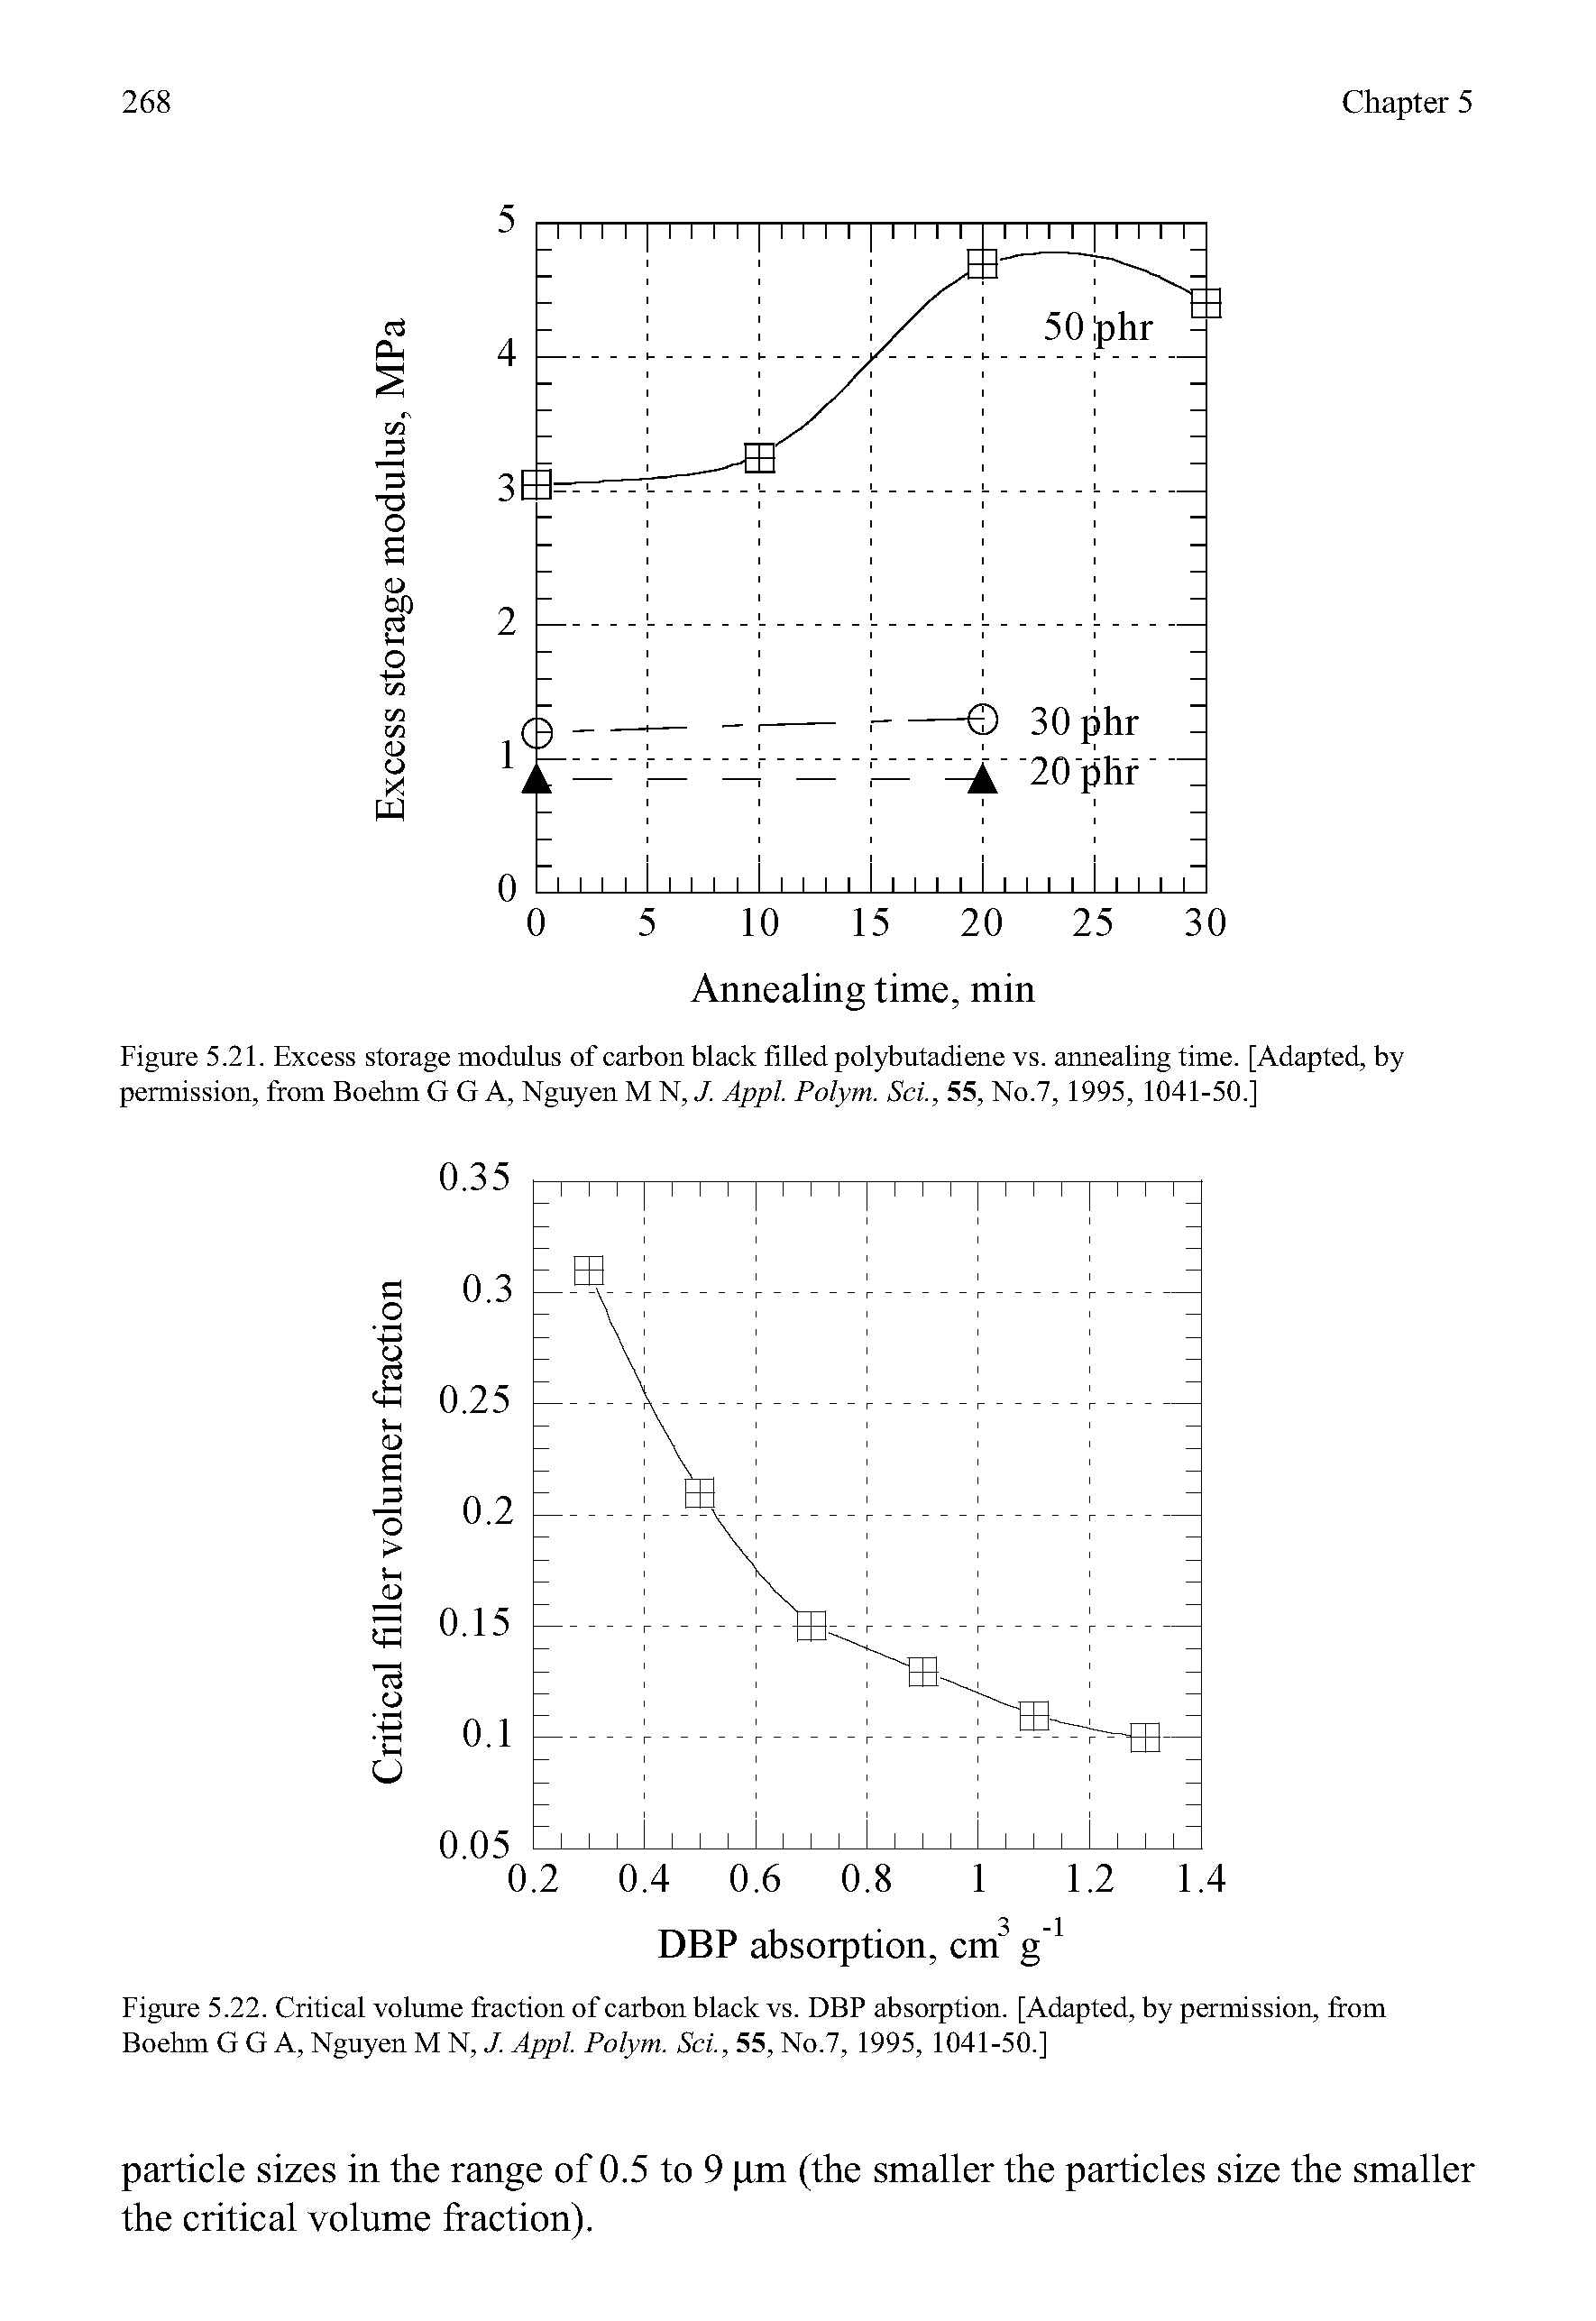 Figure 5.21. Excess storage modulus of carbon black filled polybutadiene vs. annealing time. [Adapted, by permission, from Boehm G G A, Nguyen M N, J Appl. Polym. Sci, 55, No.7, 1995, 1041-50.]...